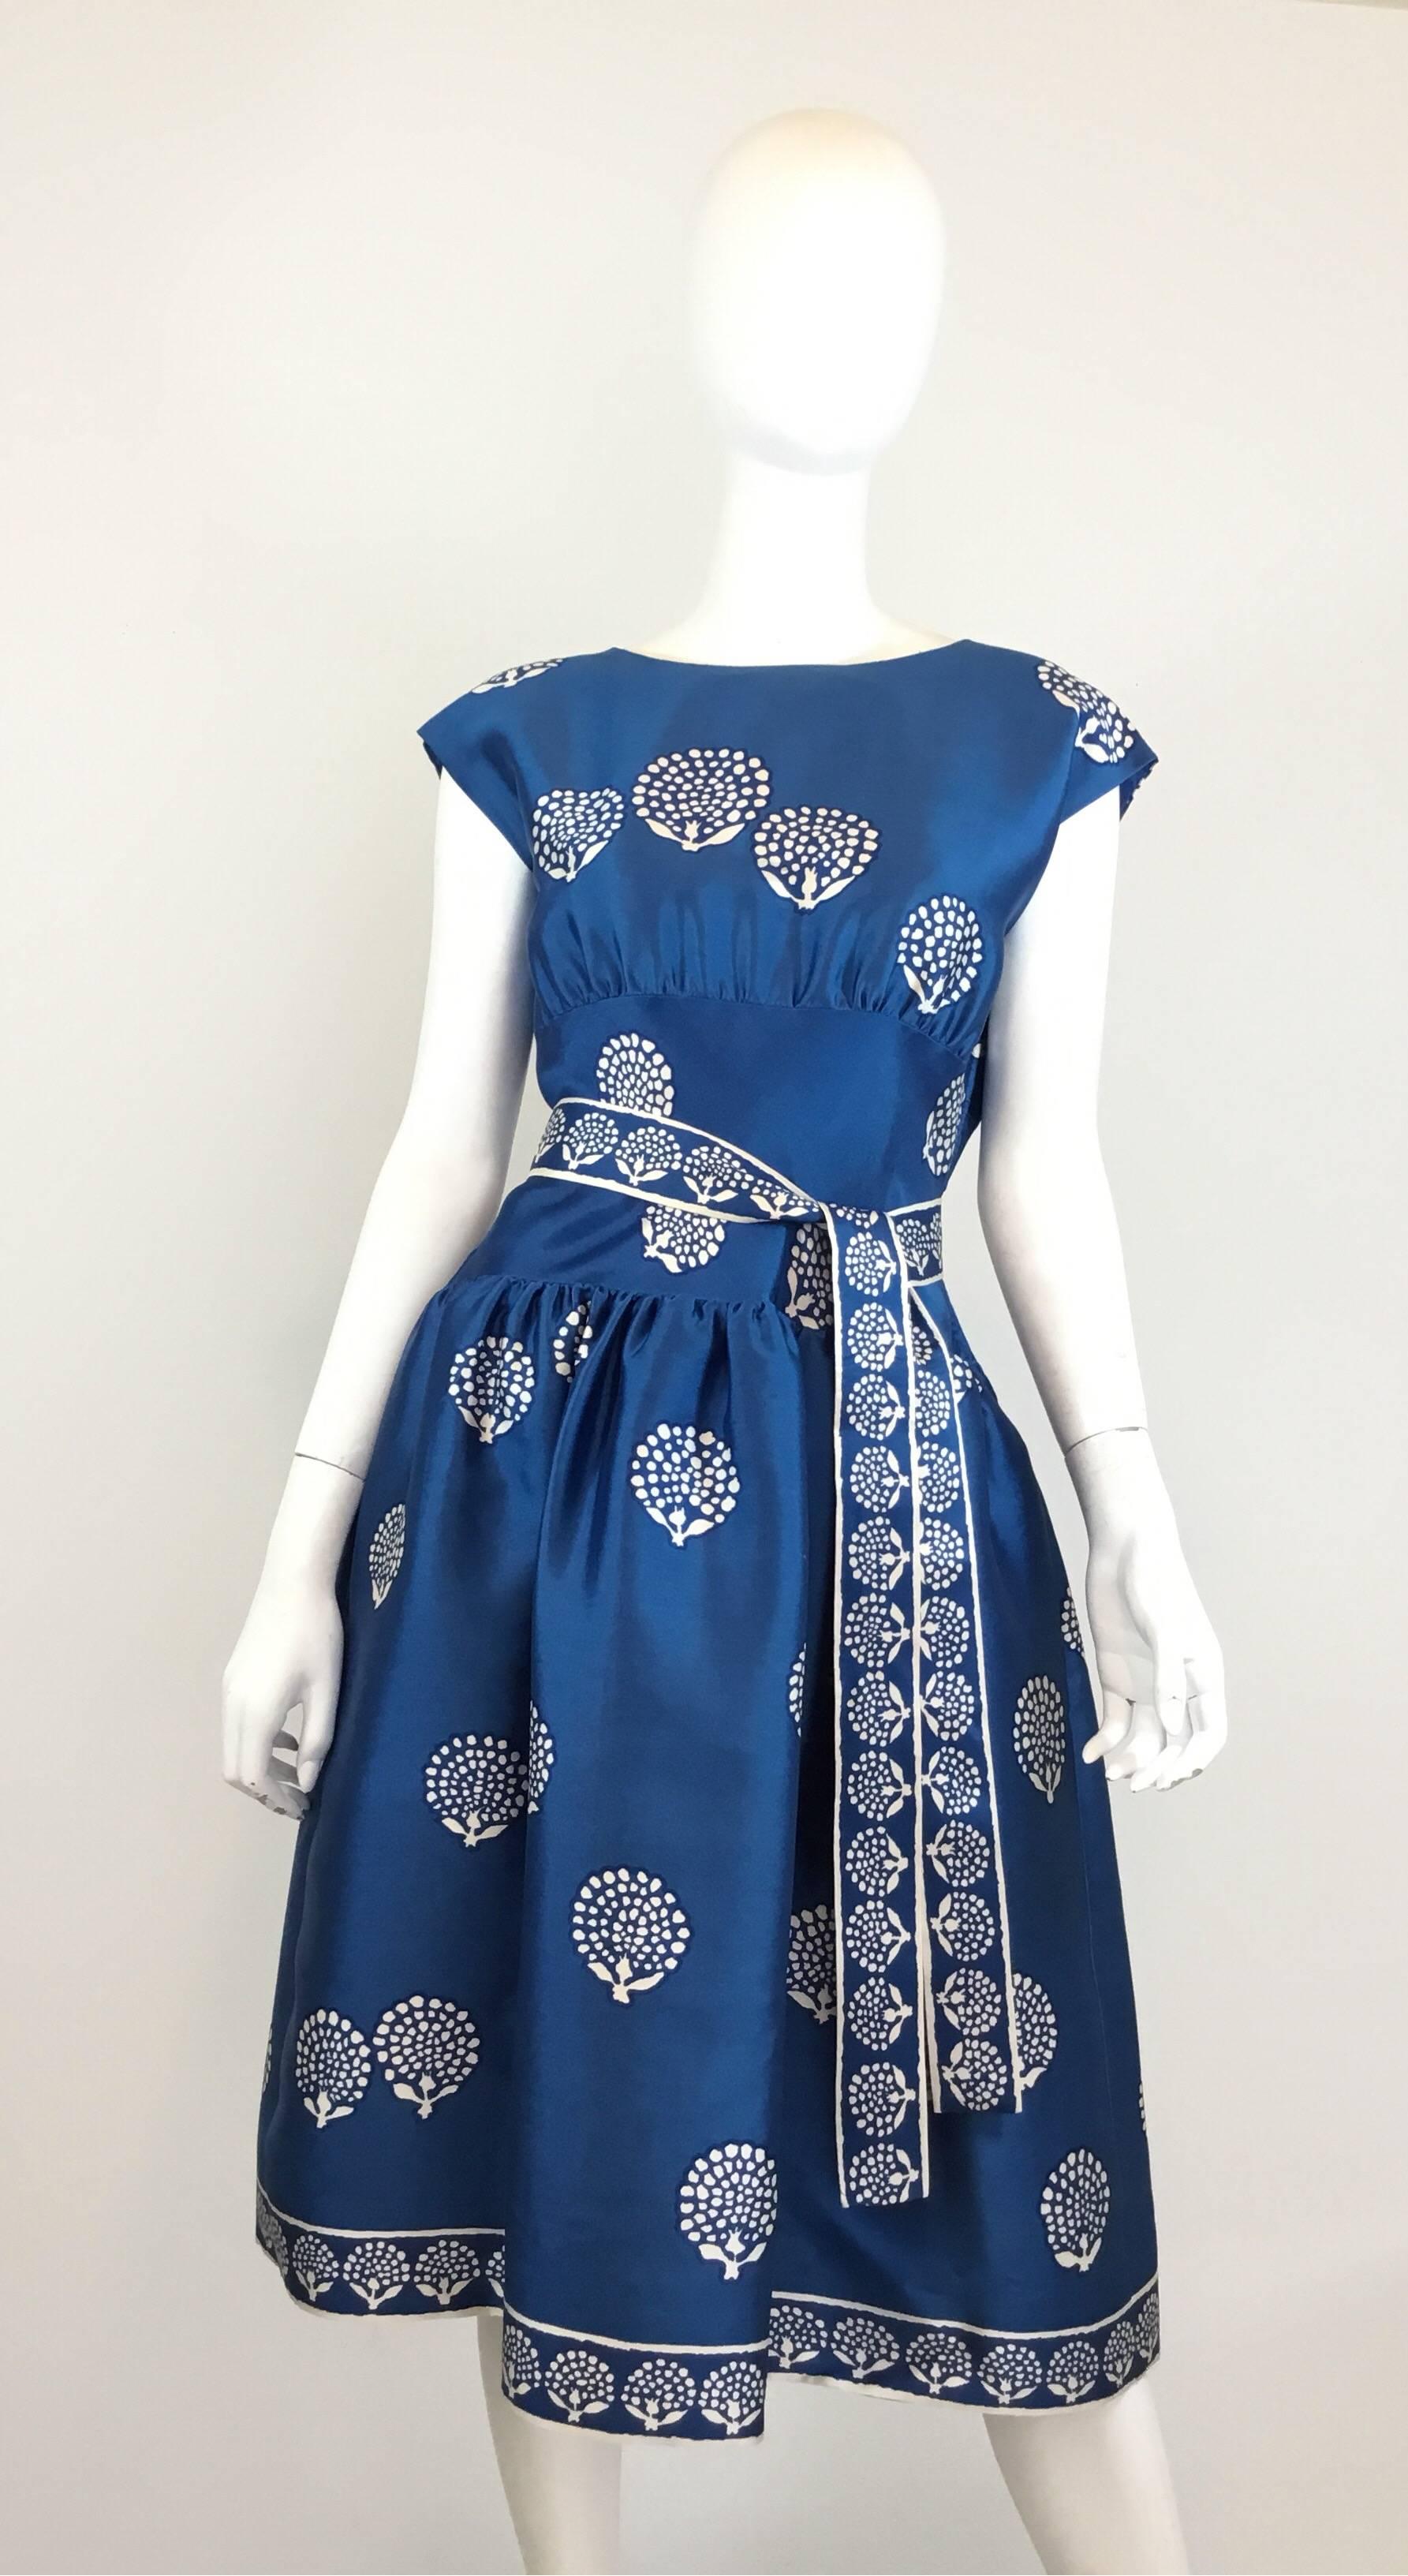 Normal Norell silk dress from the 1950's features a beautiful blue and white print throughout with zipper fastenings along both sides of the bodice,  back button closures, an additional waist tie fastening, pockets at the hips, and a full skirt.